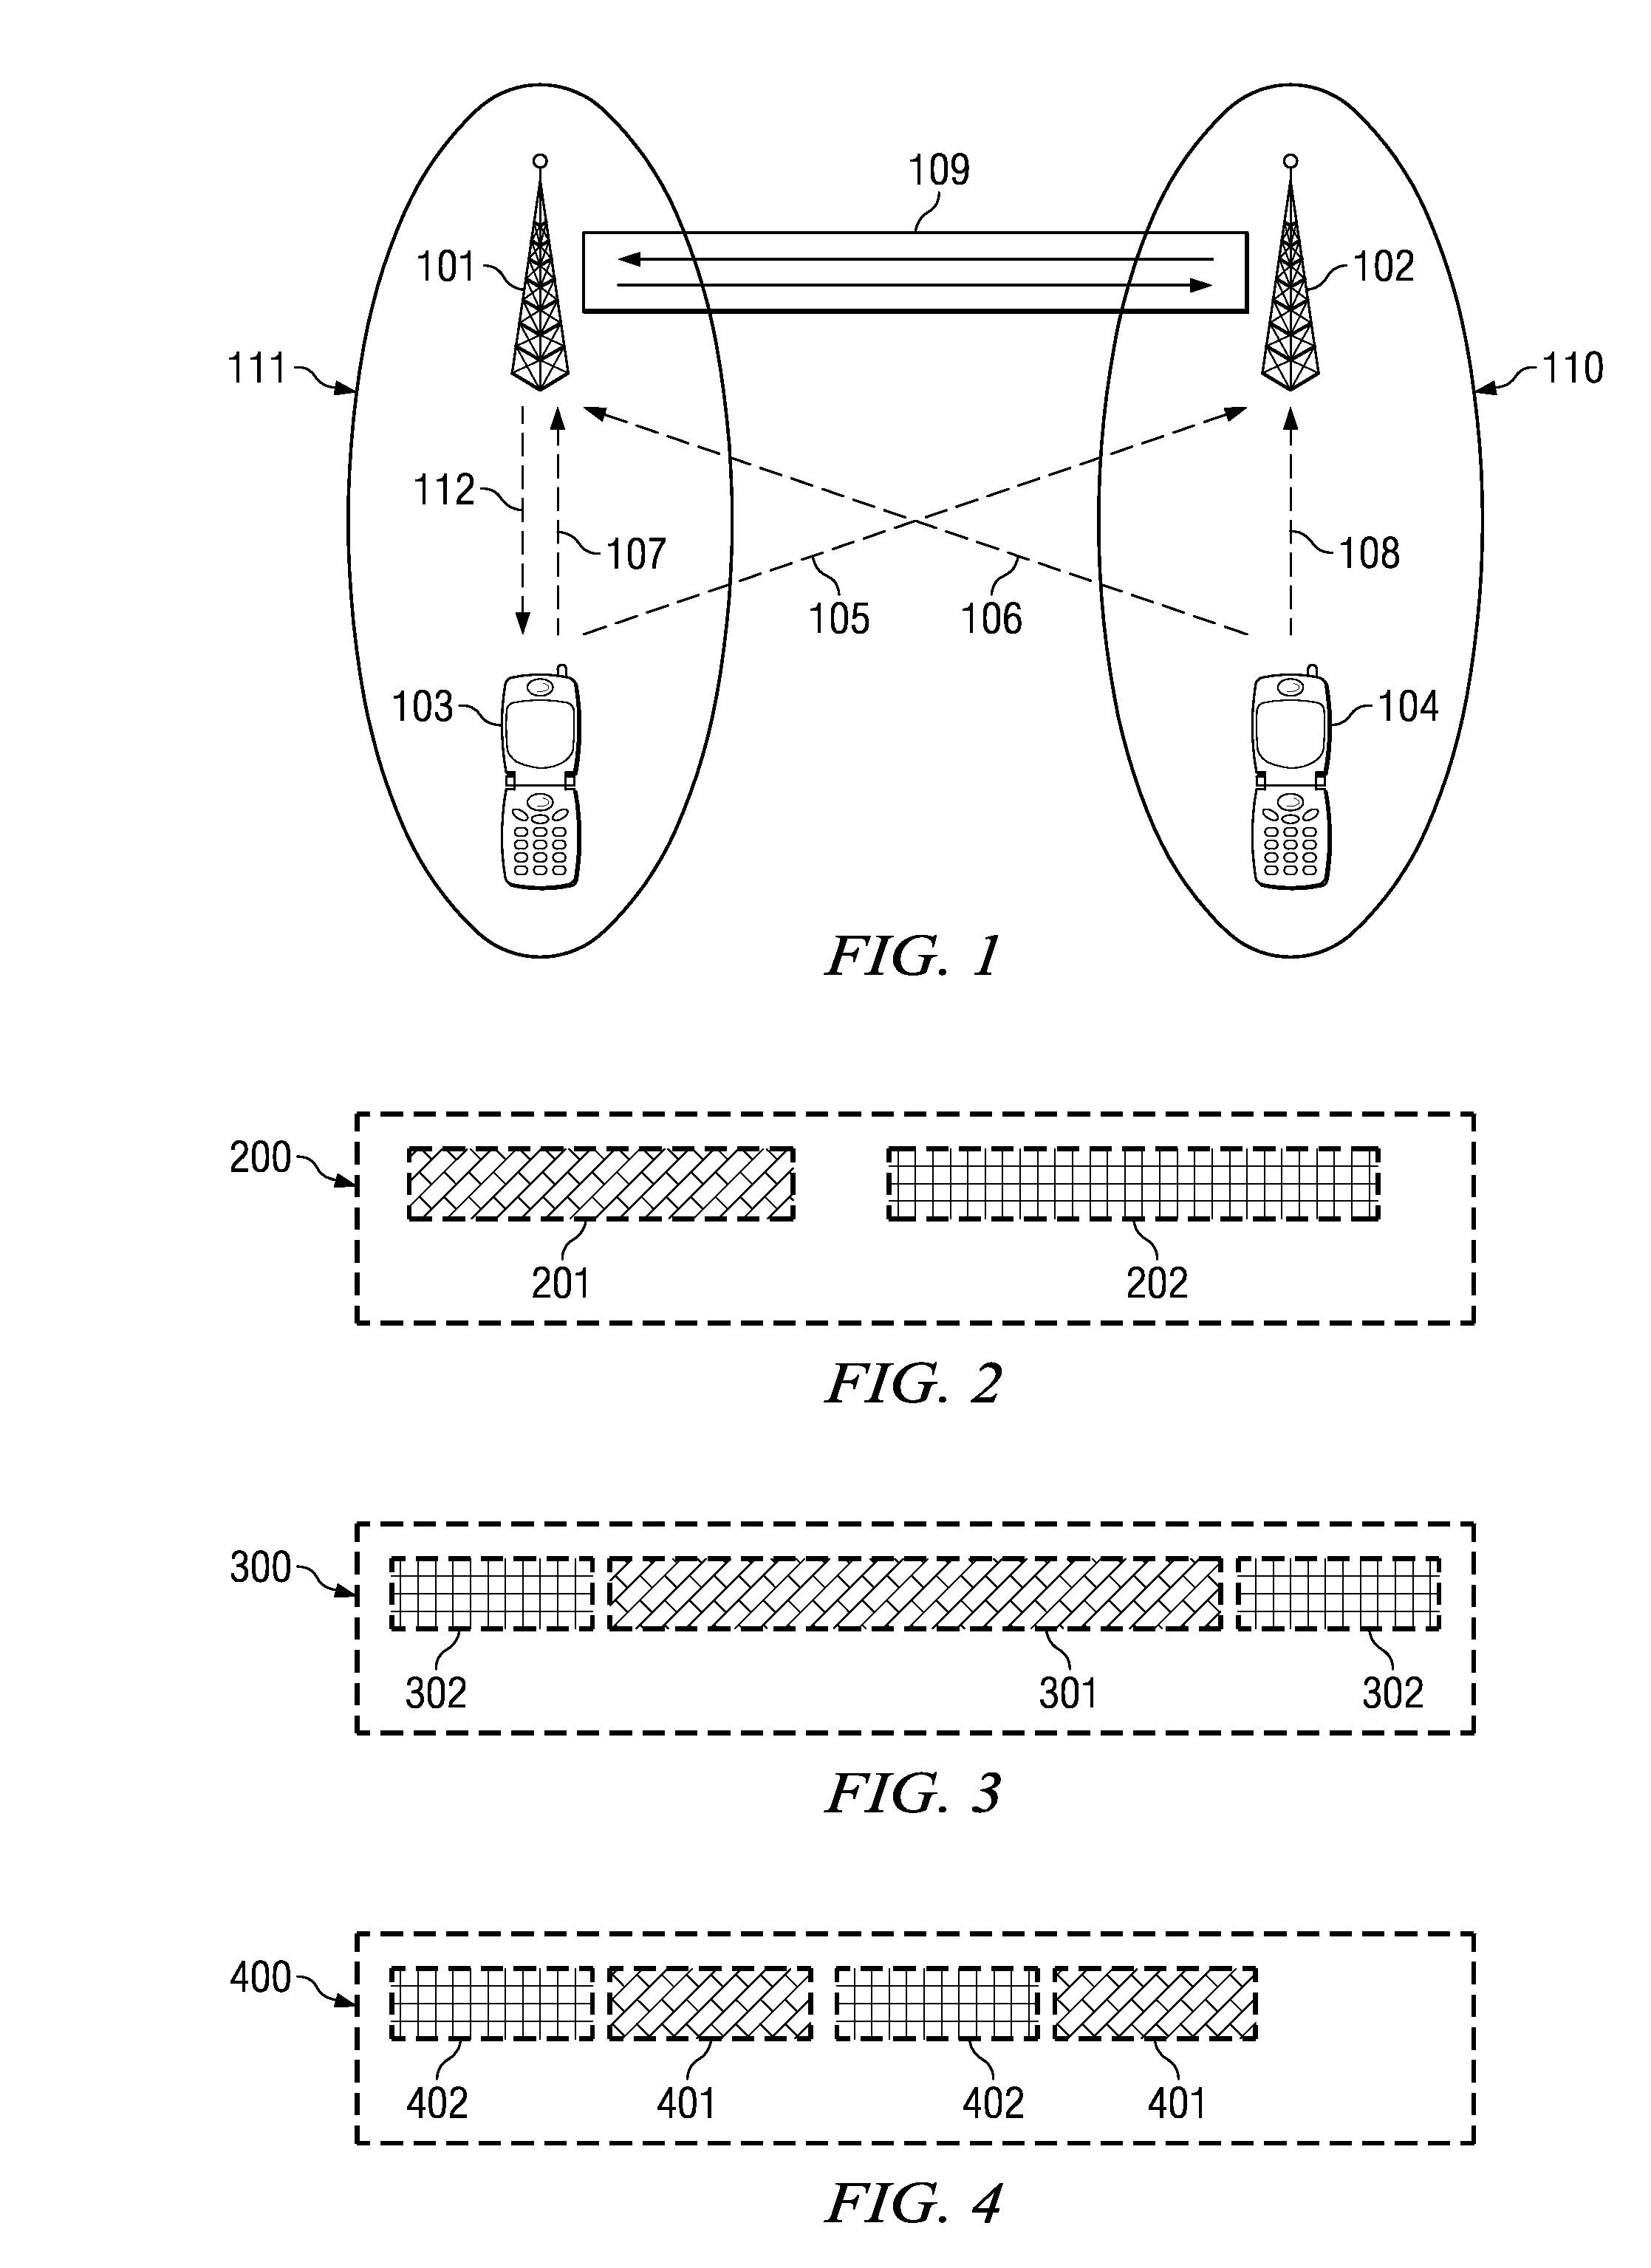 Network-Based Inter-Cell Power Control For Multi-Channel Wireless Networks